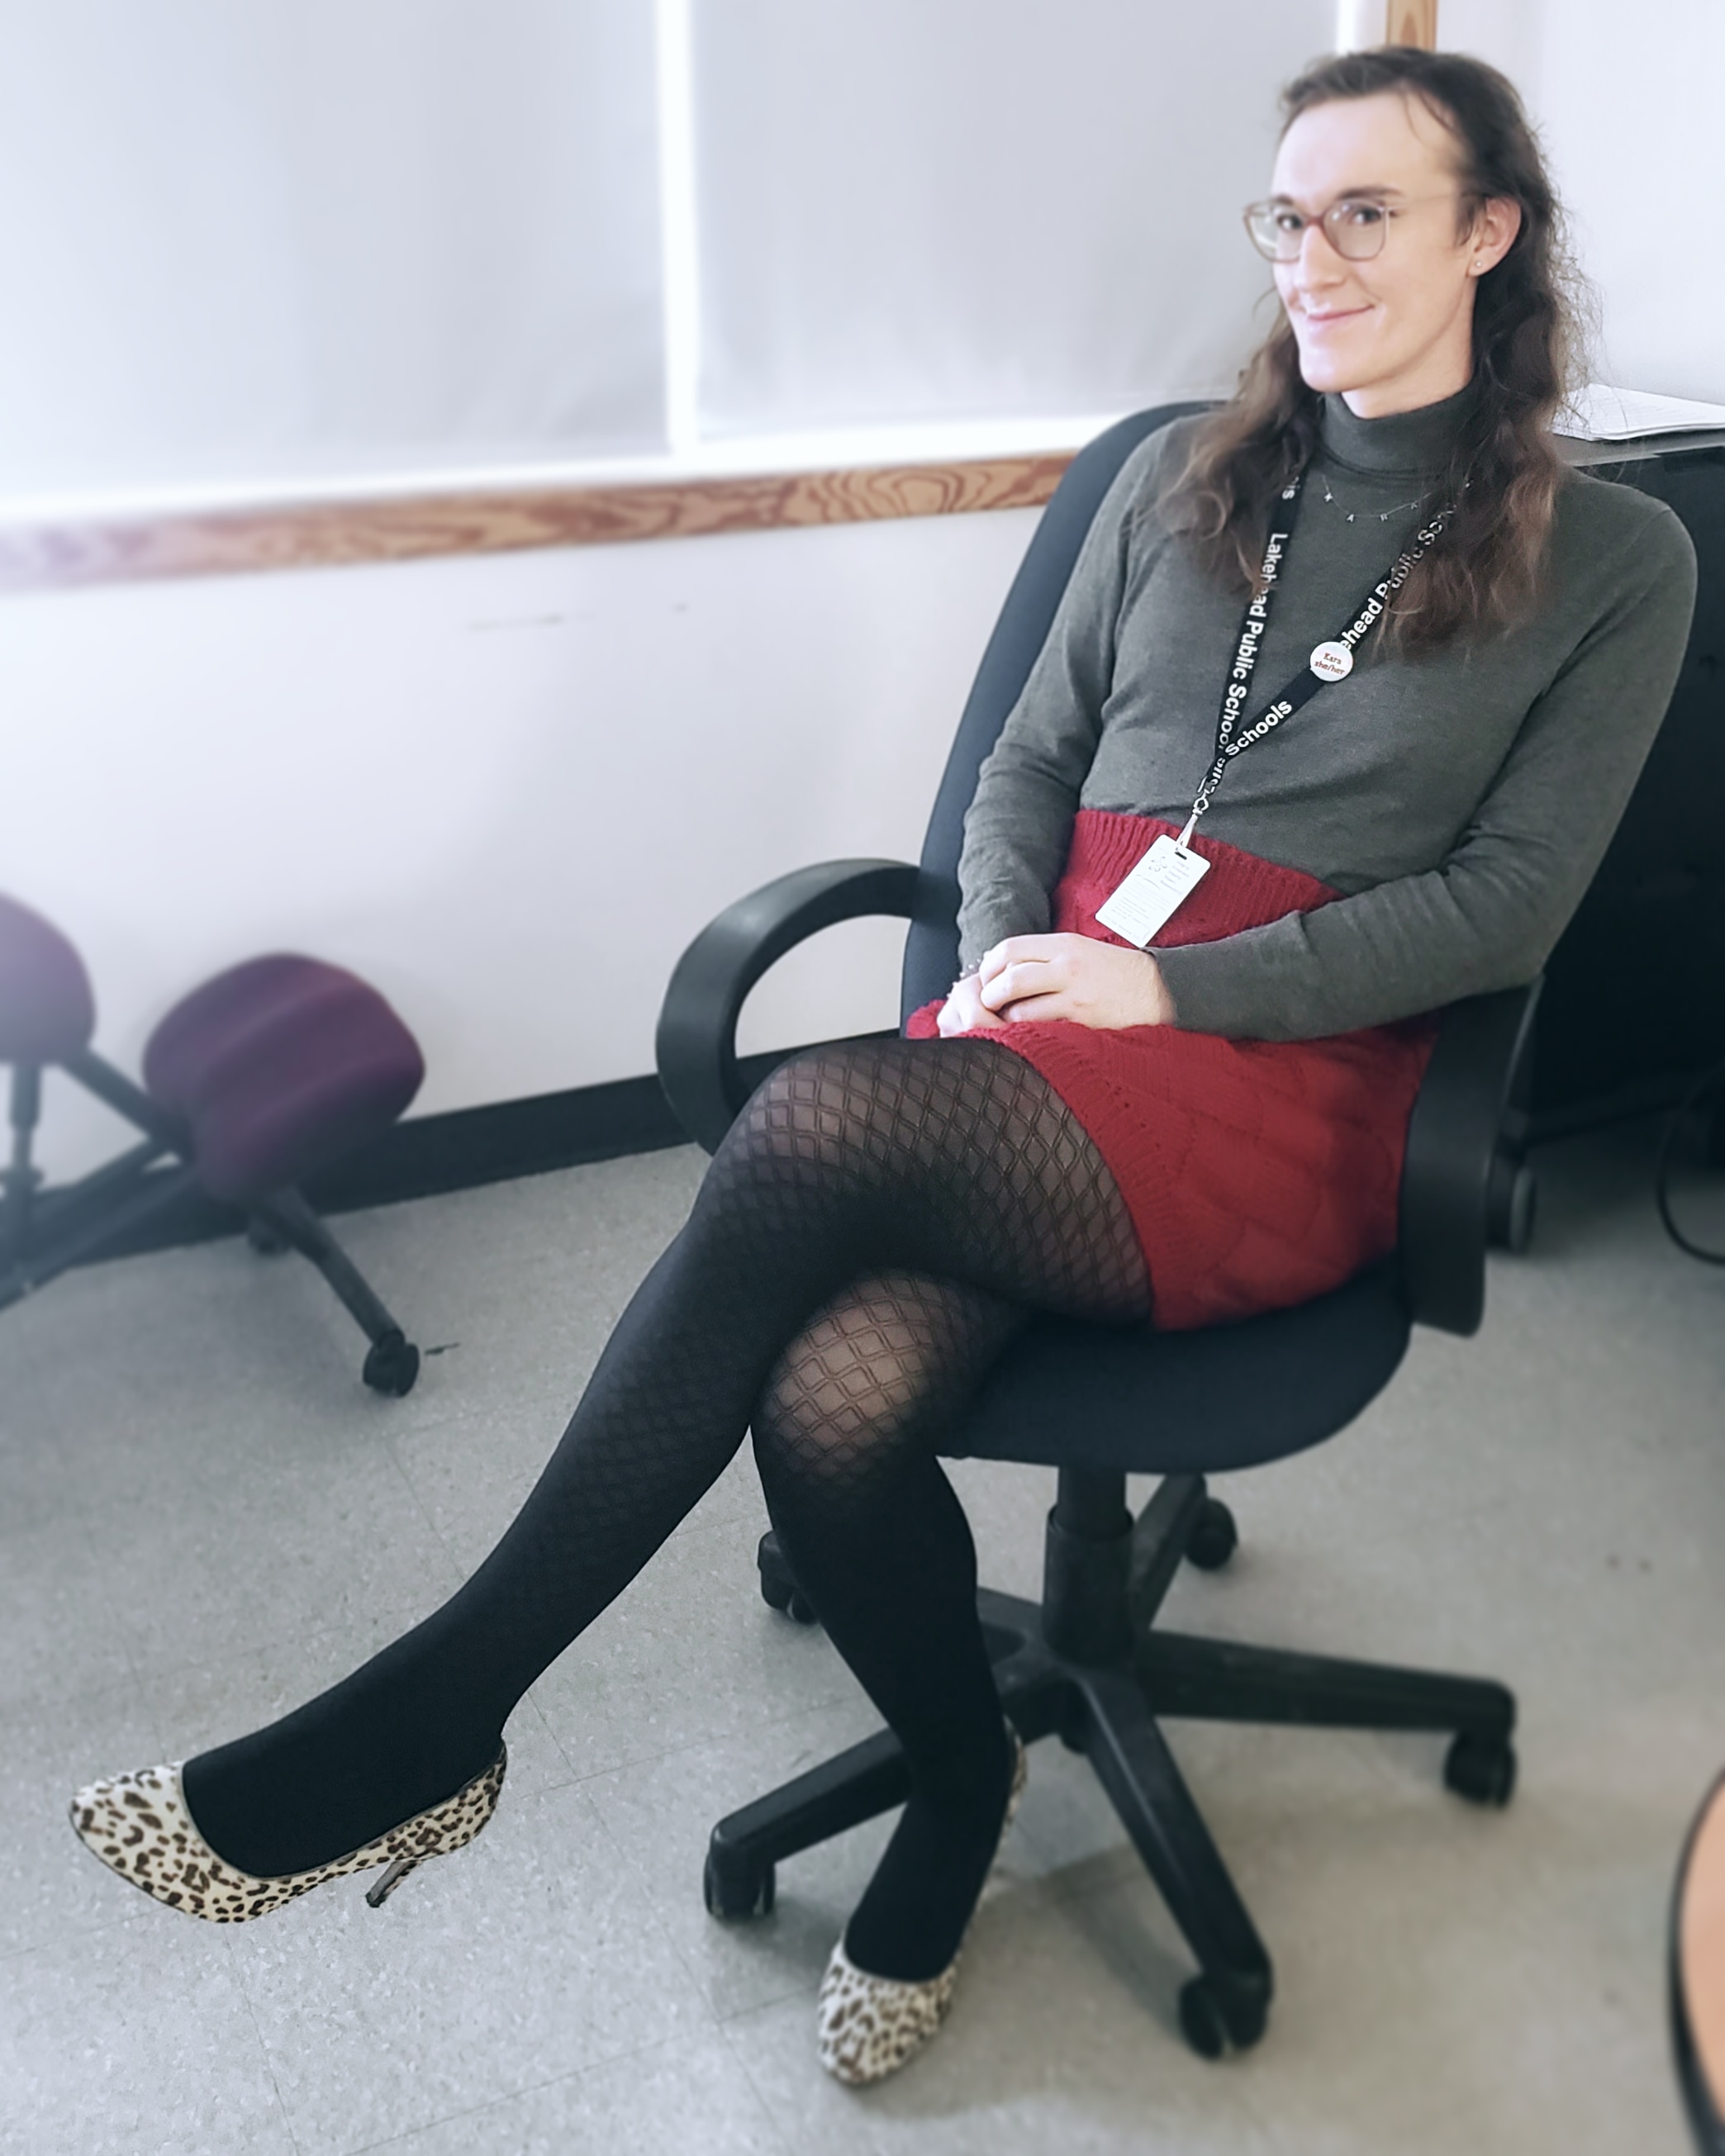 I'm sitting with my legs crossed in an office chair. I'm wearing a knitted red skirt and grey turtleneck with diamond-pattern tights and leopard ankle booties. My hair is down, and I am smiling.